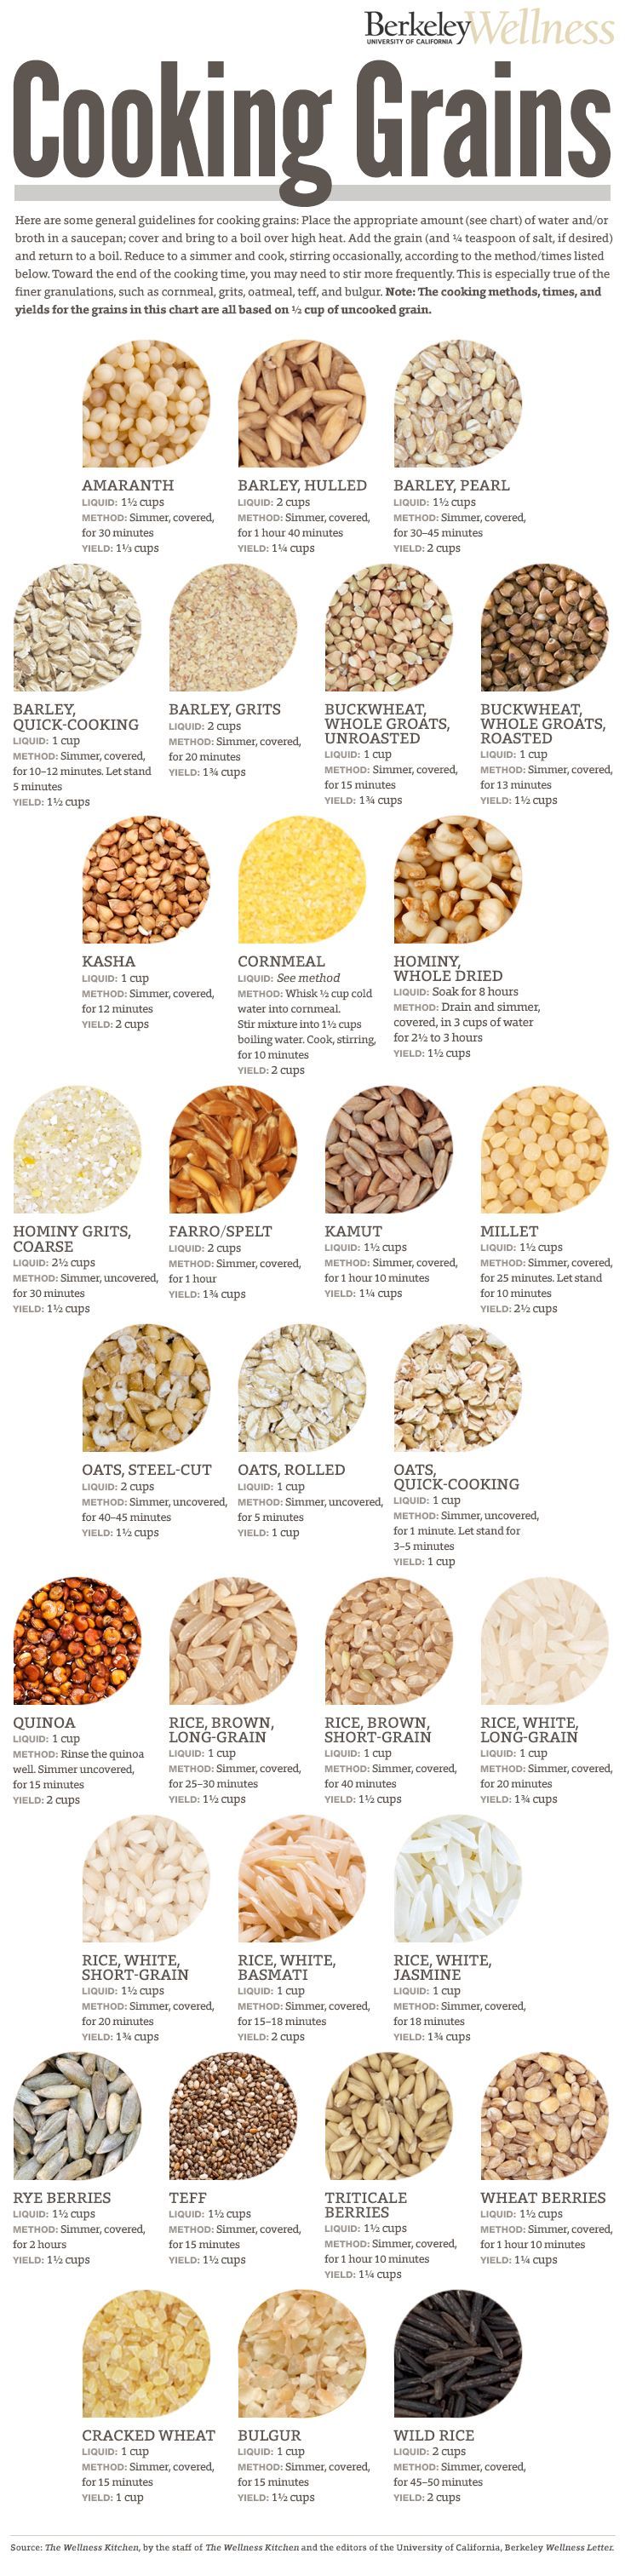 Guide To Cooking Grains